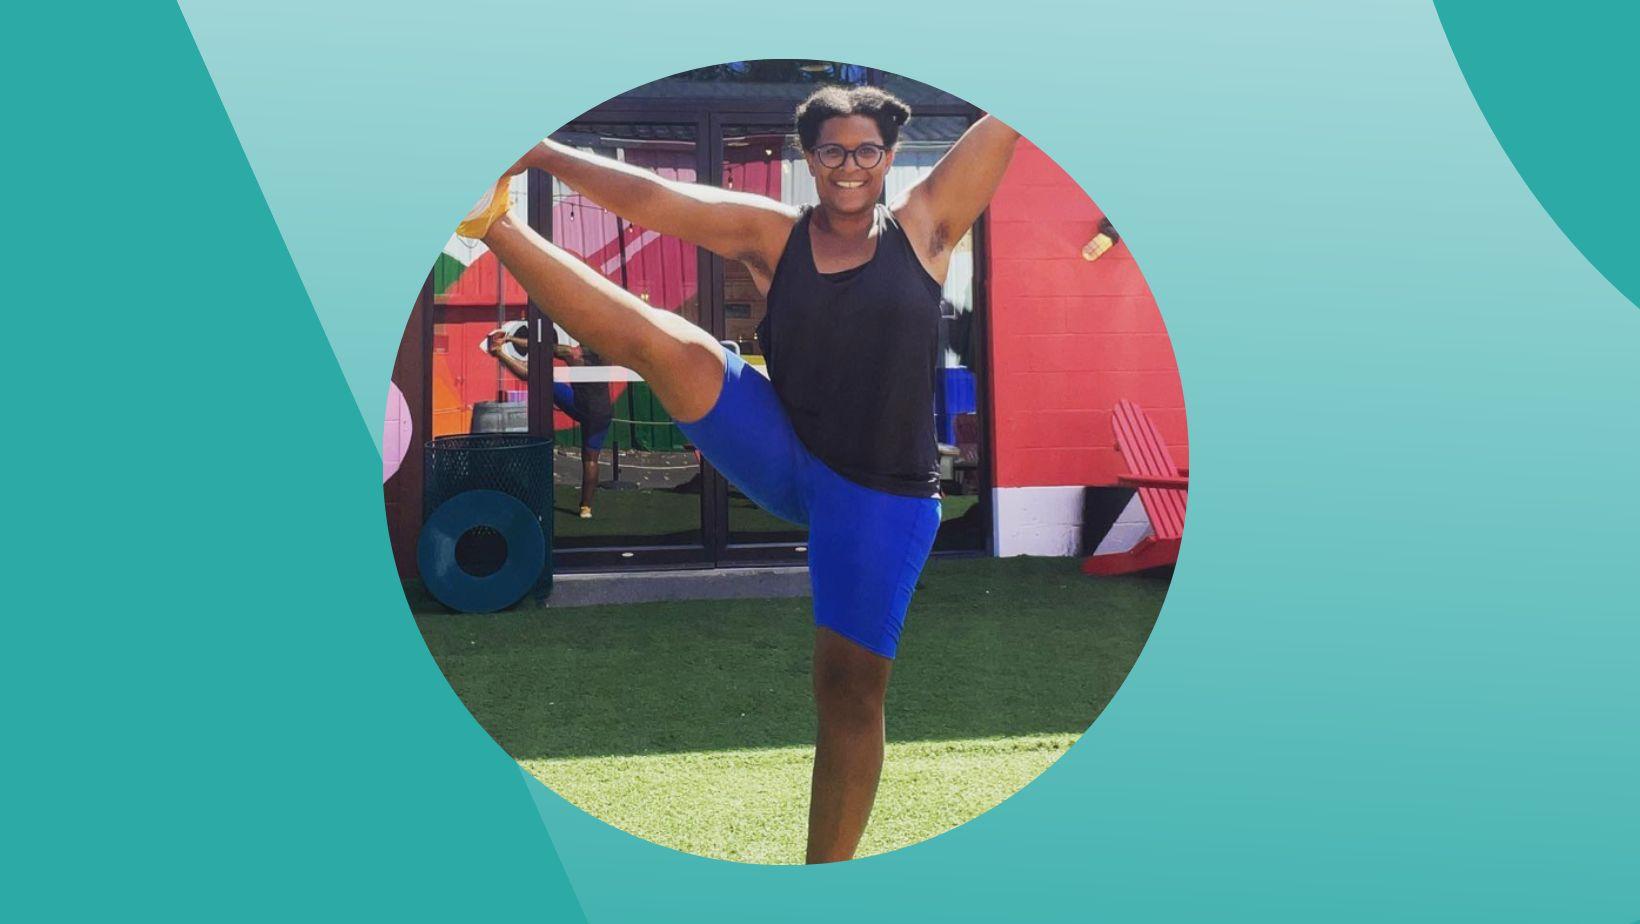 Ompractice teacher Devon Wilson-Hill in standing leg extension with brightly colored background